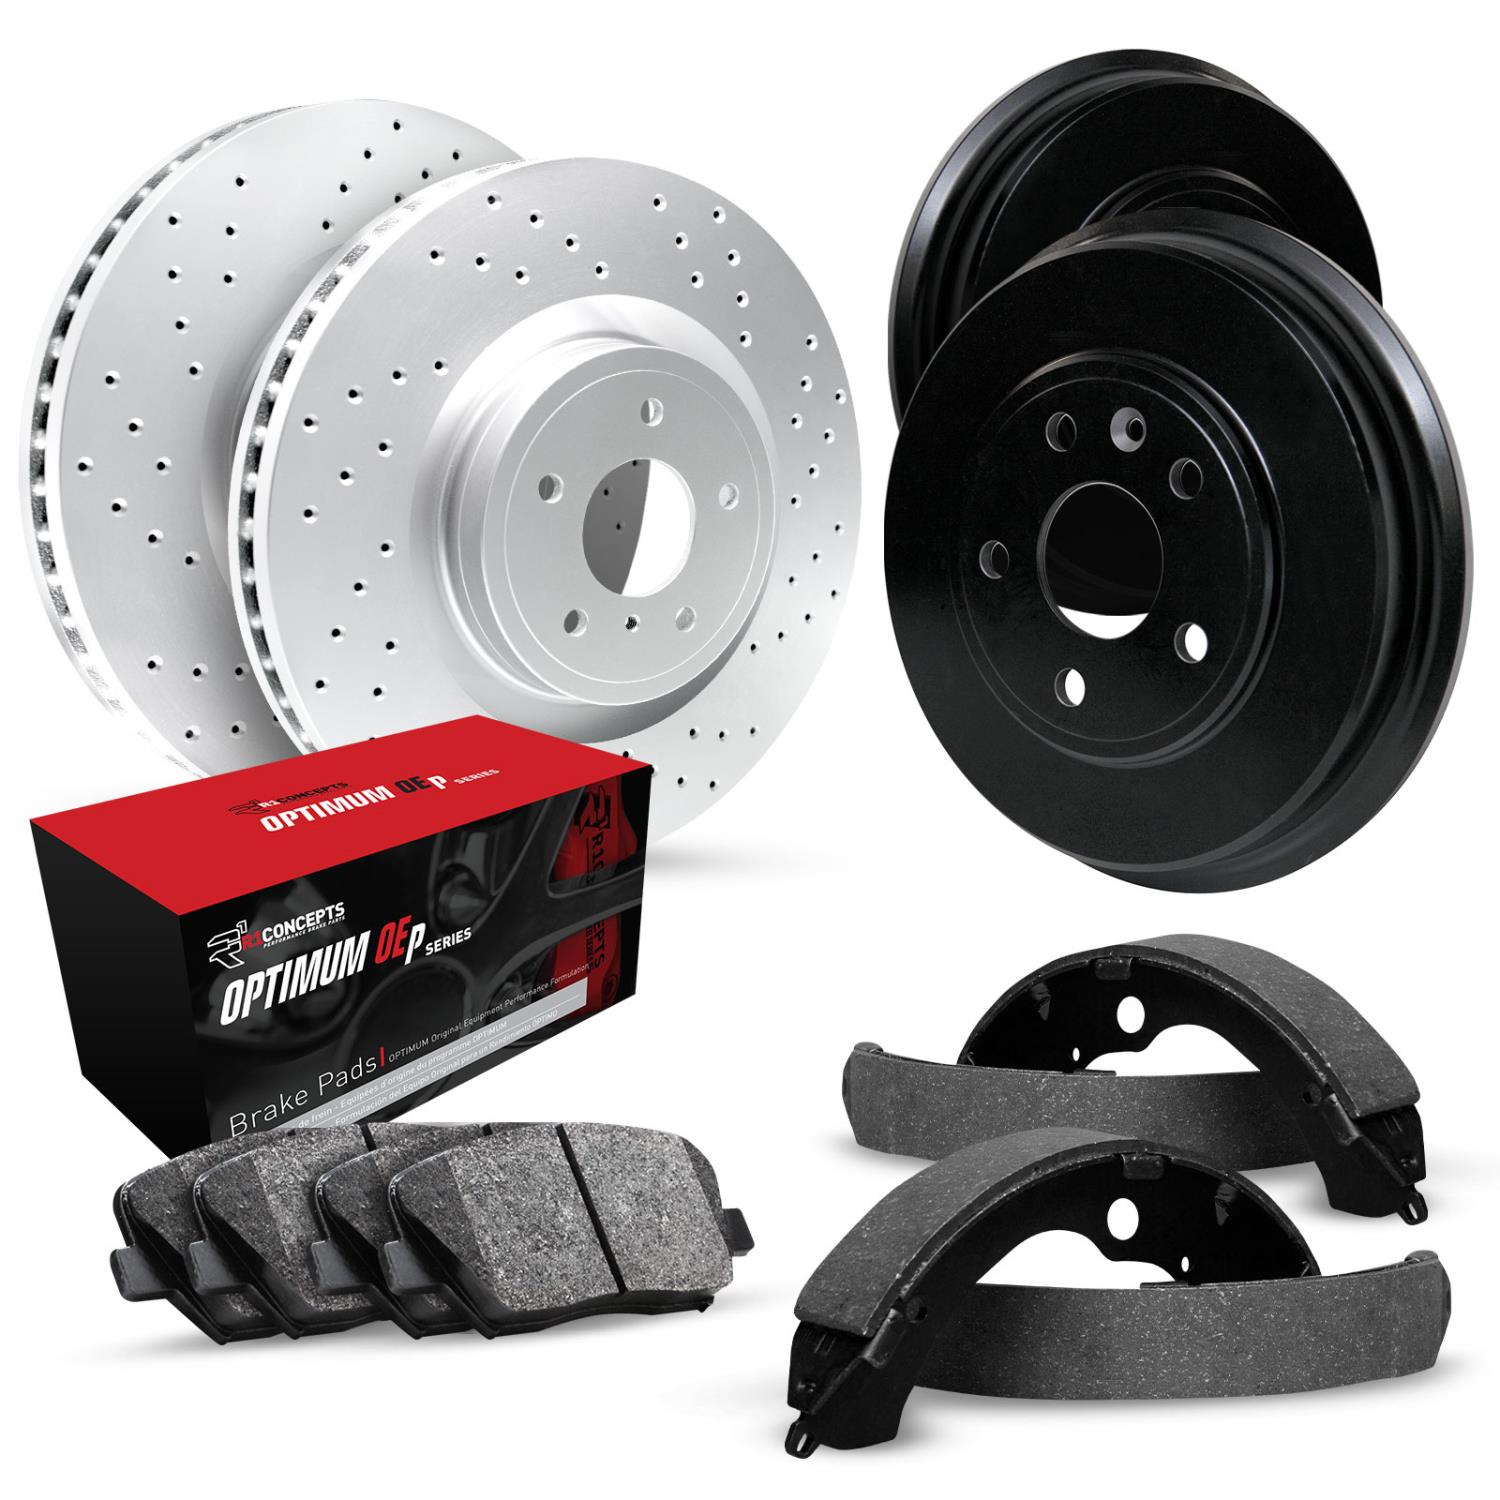 GEO-Carbon Drilled Brake Rotor & Drum Set w/Optimum OE Pads & Shoes, 1992-1996 GM, Position: Front & Rear